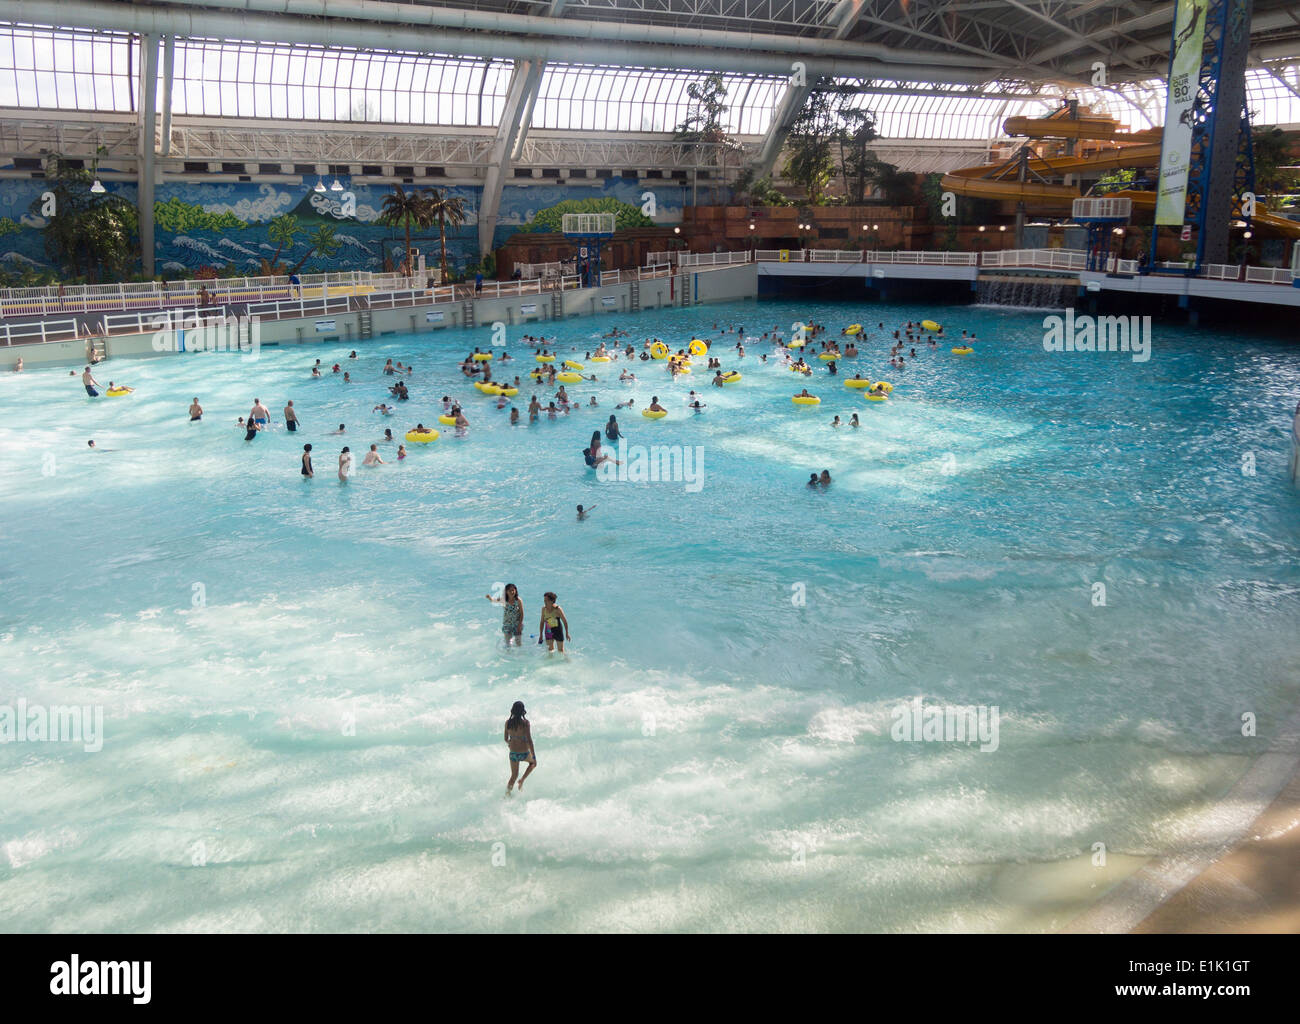 Wave Pool at the West Edmonton Mall. The large indoor pool at this massive mall attracts many bathers Stock Photo